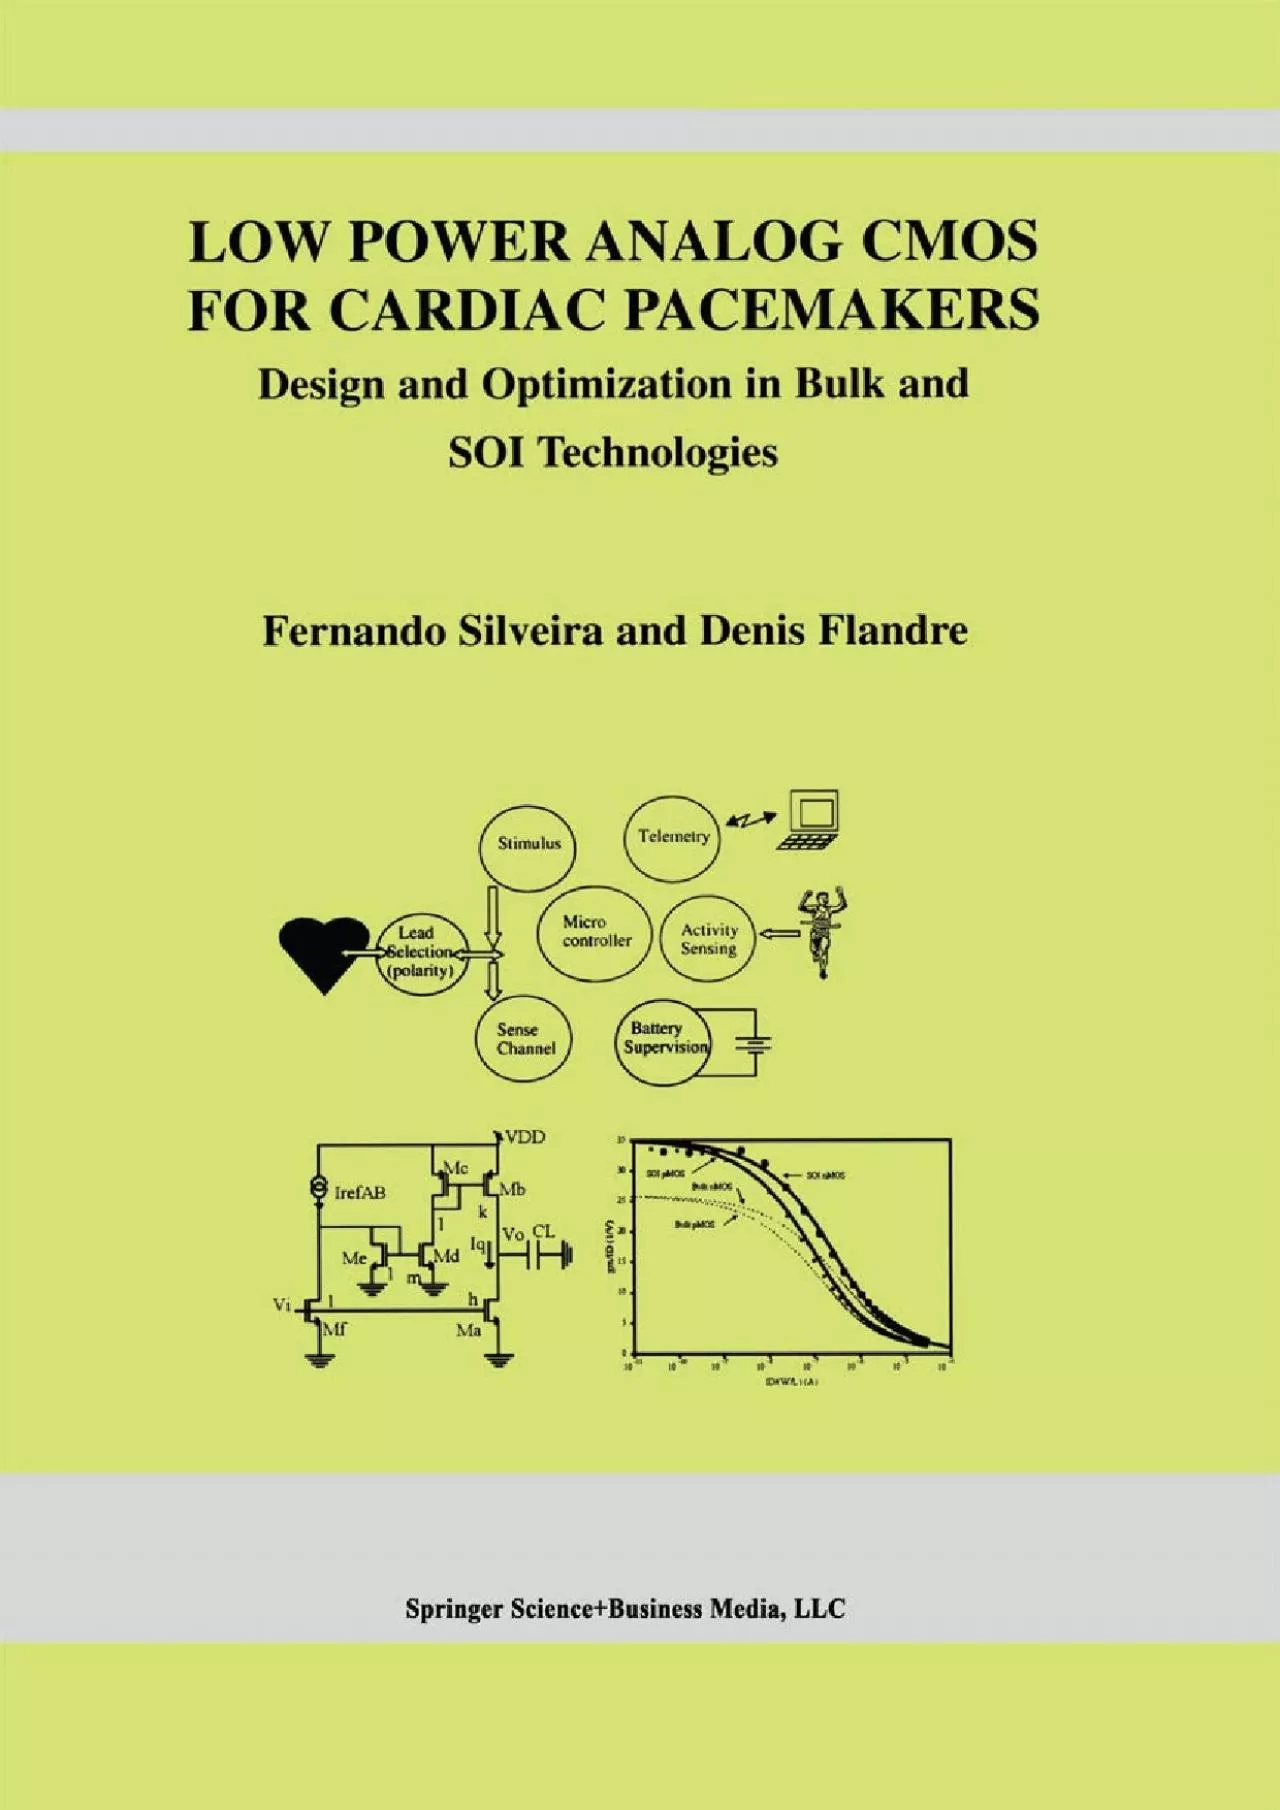 (DOWNLOAD)-Low Power Analog CMOS for Cardiac Pacemakers: Design and Optimization in Bulk